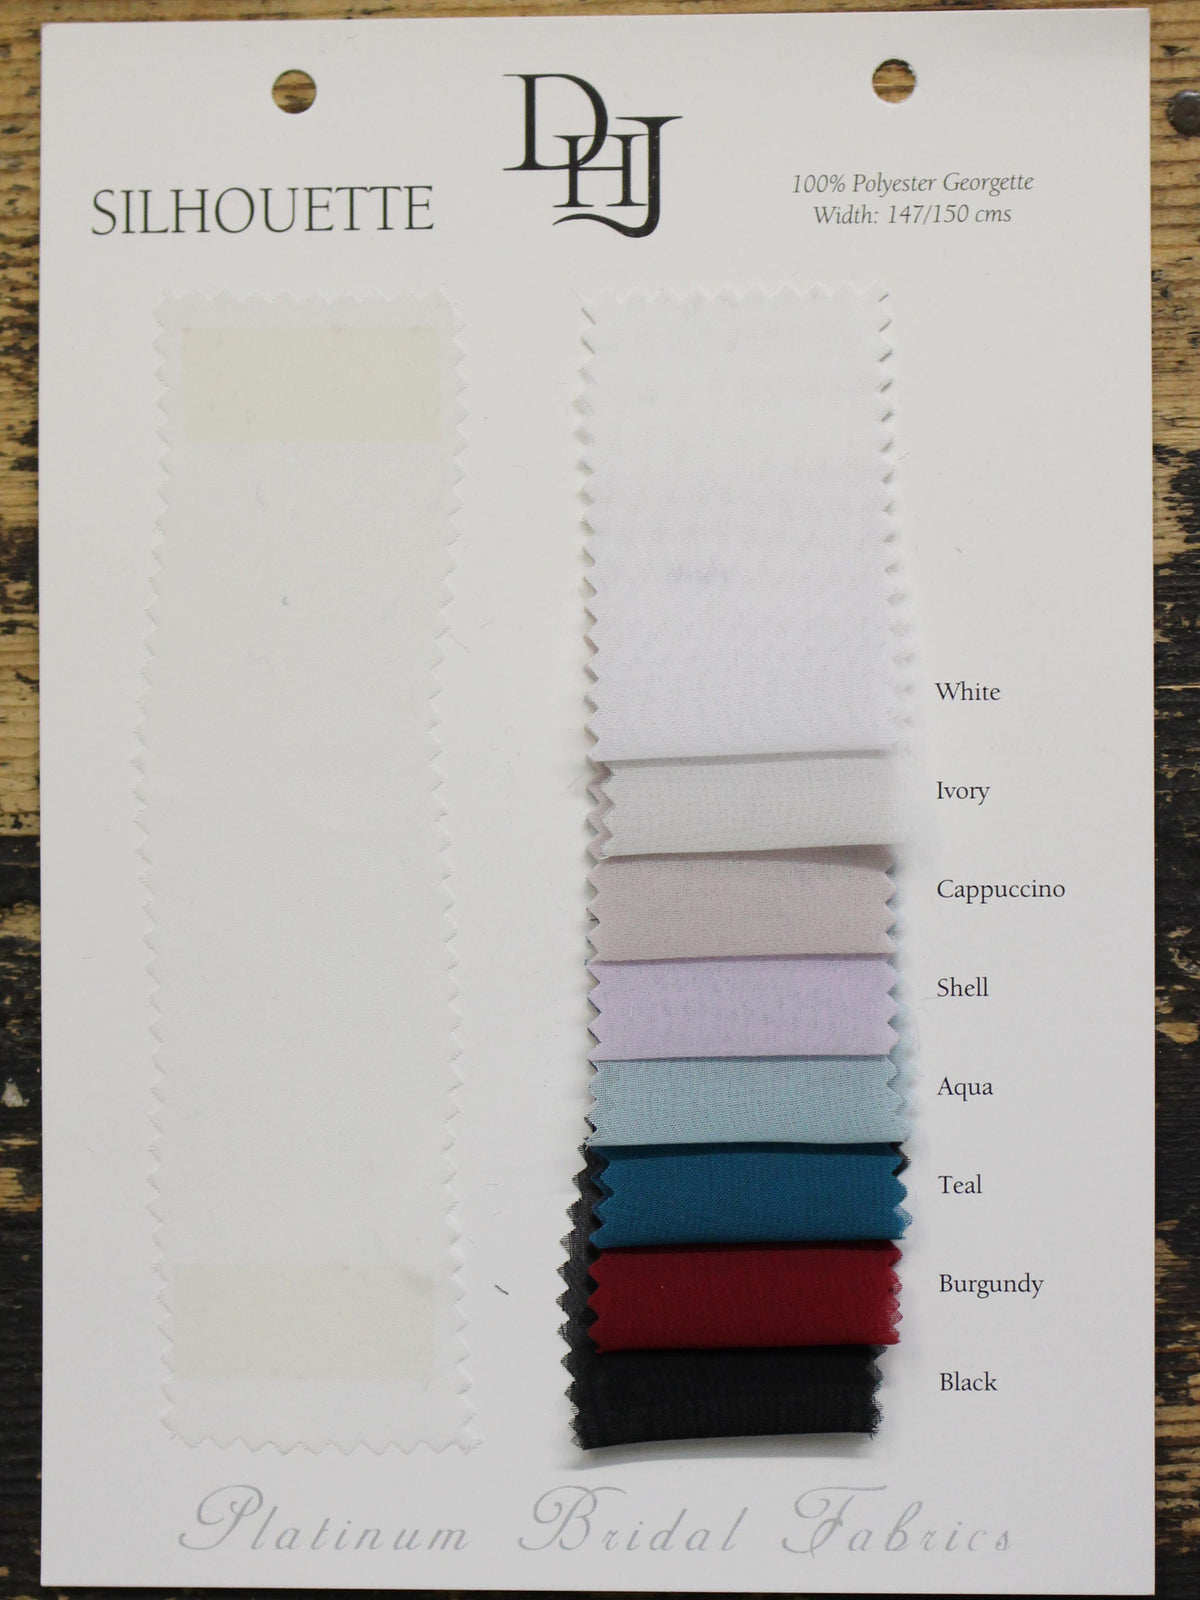 Sample Card of Polyester Georgette - Silhouette